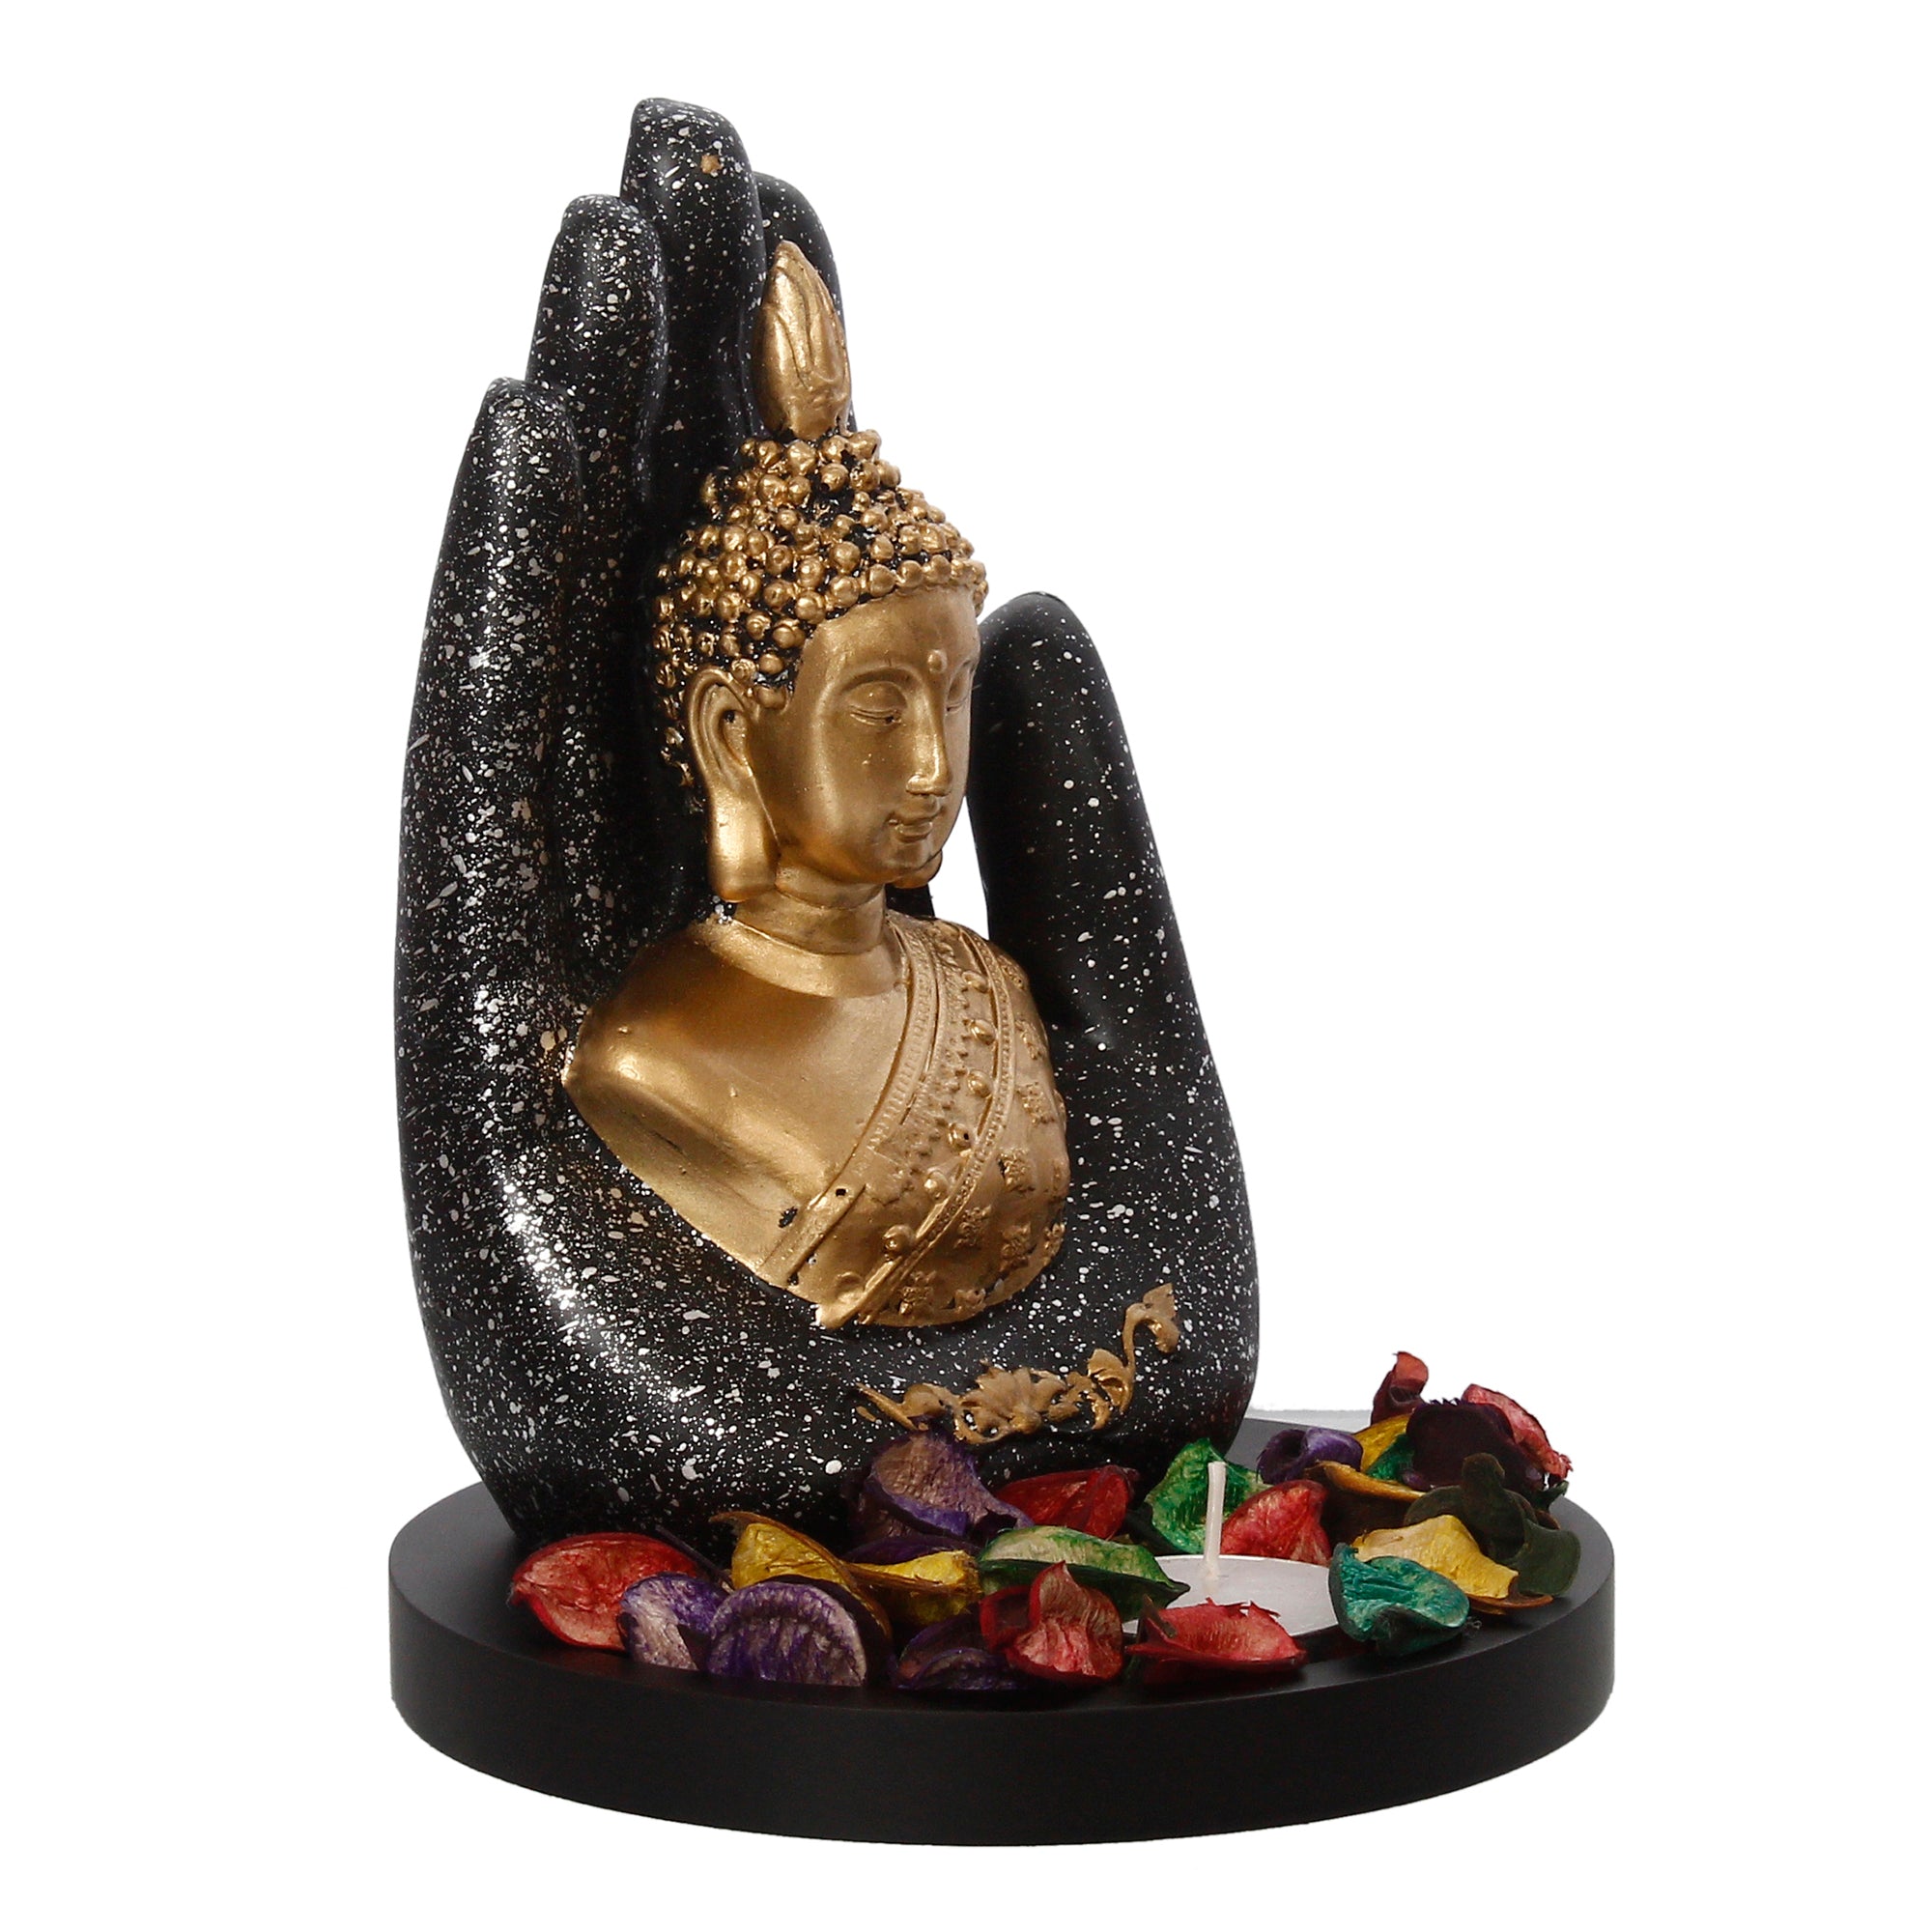 Polyresin Black and Golden Handcrafted Palm Buddha Statue with Wooden Base, Fragranced Petals and Tealight 4